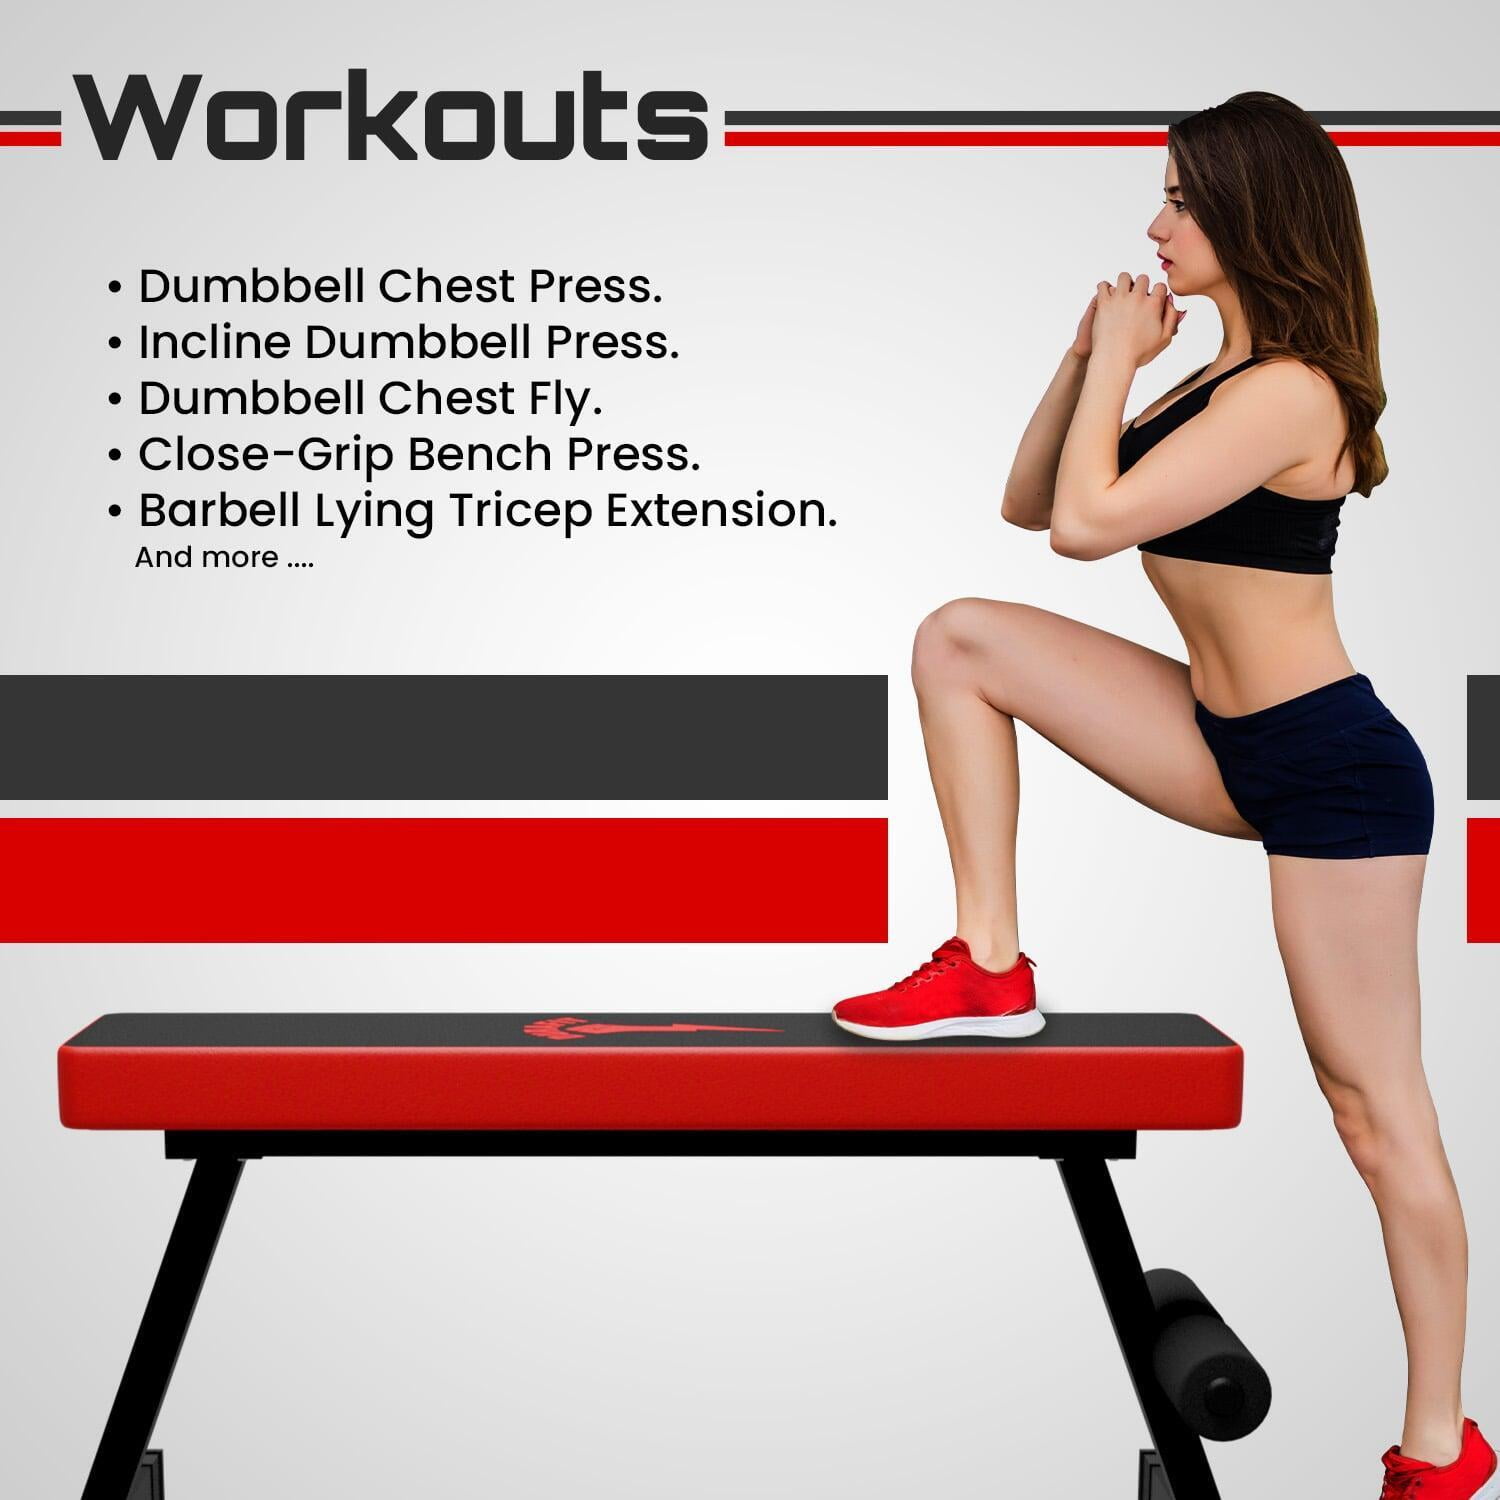 Durafit Simple Flat Bench SB01 used for Multiple workouts